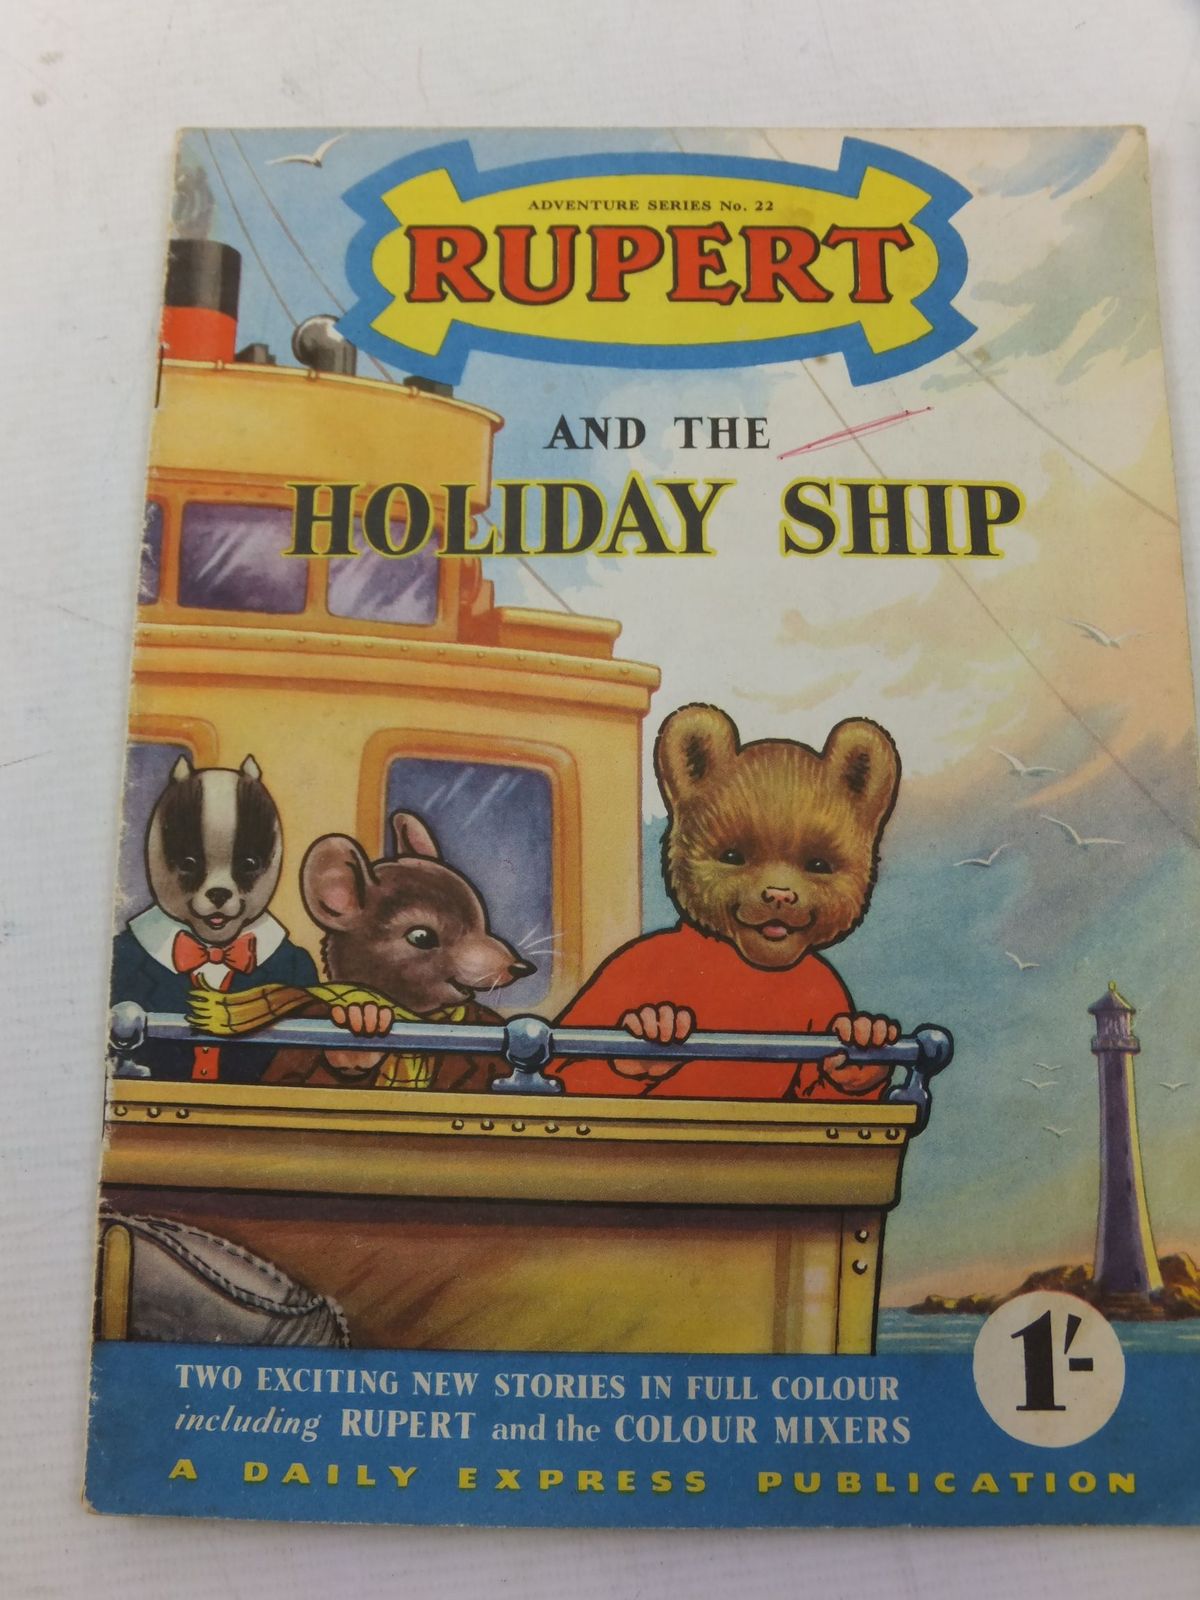 Photo of RUPERT ADVENTURE SERIES No. 22 - RUPERT AND THE HOLIDAY SHIP written by Bestall, Alfred published by Daily Express (STOCK CODE: 2114251)  for sale by Stella & Rose's Books